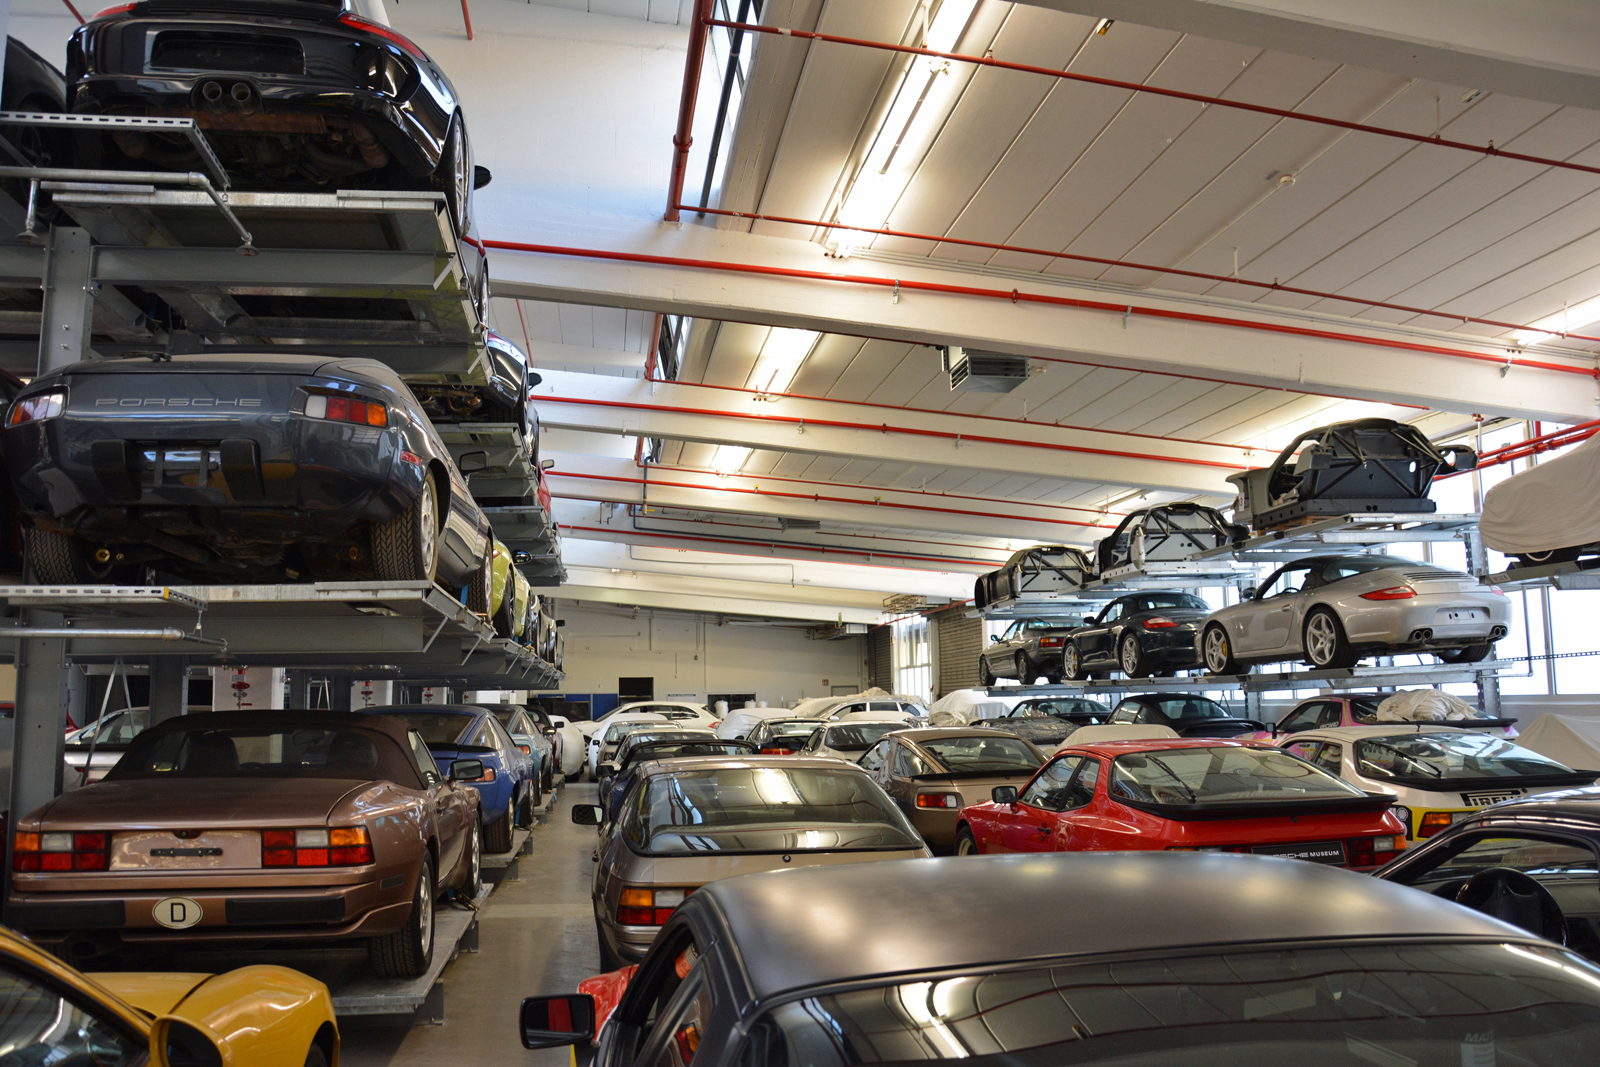 <p>As Porsche’s lineup grows, so does its collection. Cars are stacked three-high on massive shelves that line the walls, but parts of the warehouse nonetheless look like New York during <strong>rush hour in the olden days when we got traffic jams</strong>. An average of <strong>15 cars</strong> join the fleet annually, and Klein acknowledged storage space is not endless.</p>